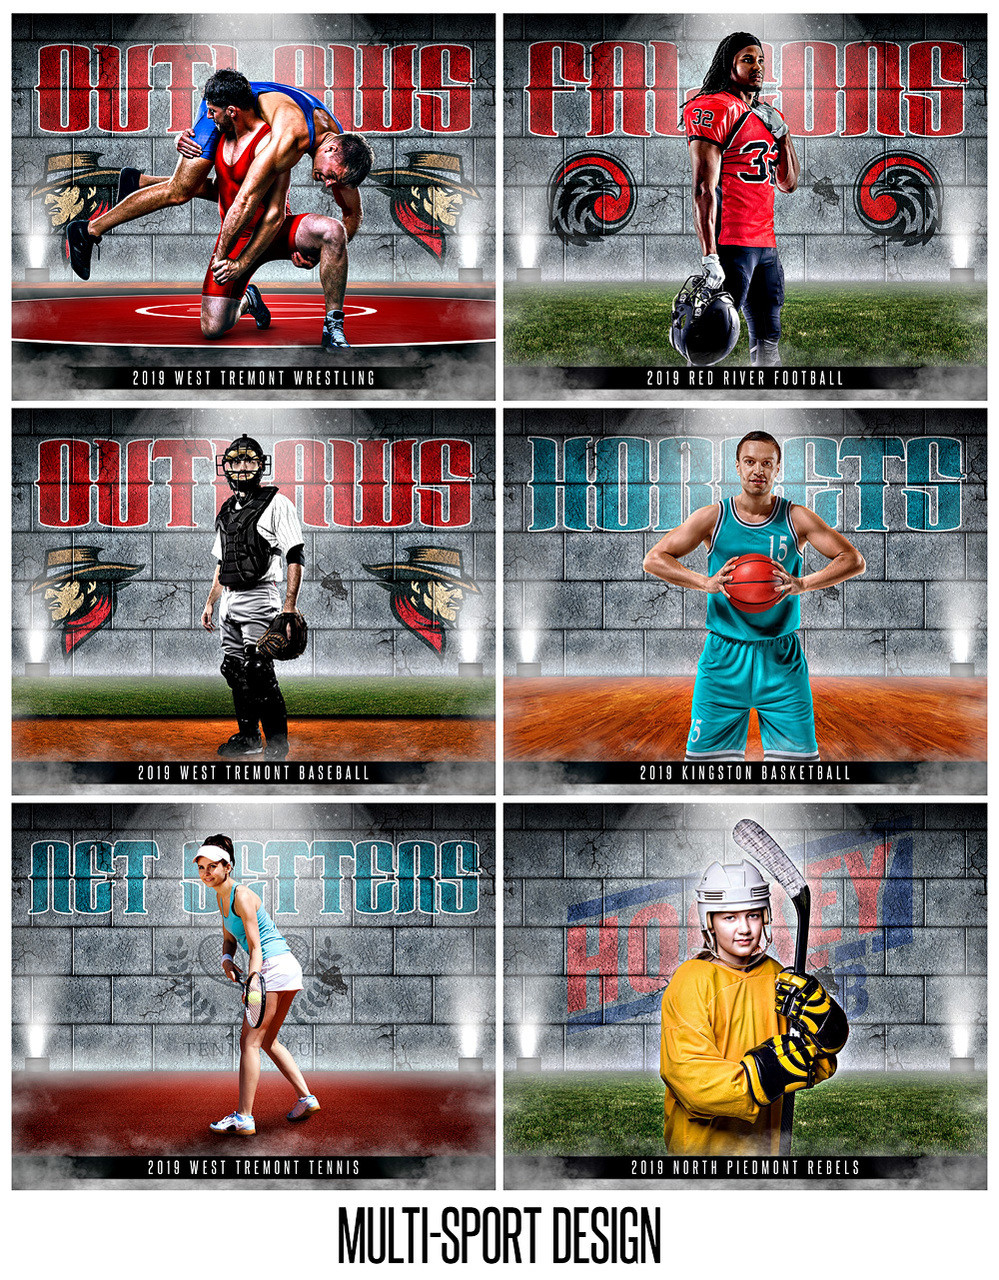 16x20 MULTI-SPORT POSTER TEMPLATE - CRACKED WALL - CUSTOM PHOTOSHOP LAYERED SPORTS TEMPLATE